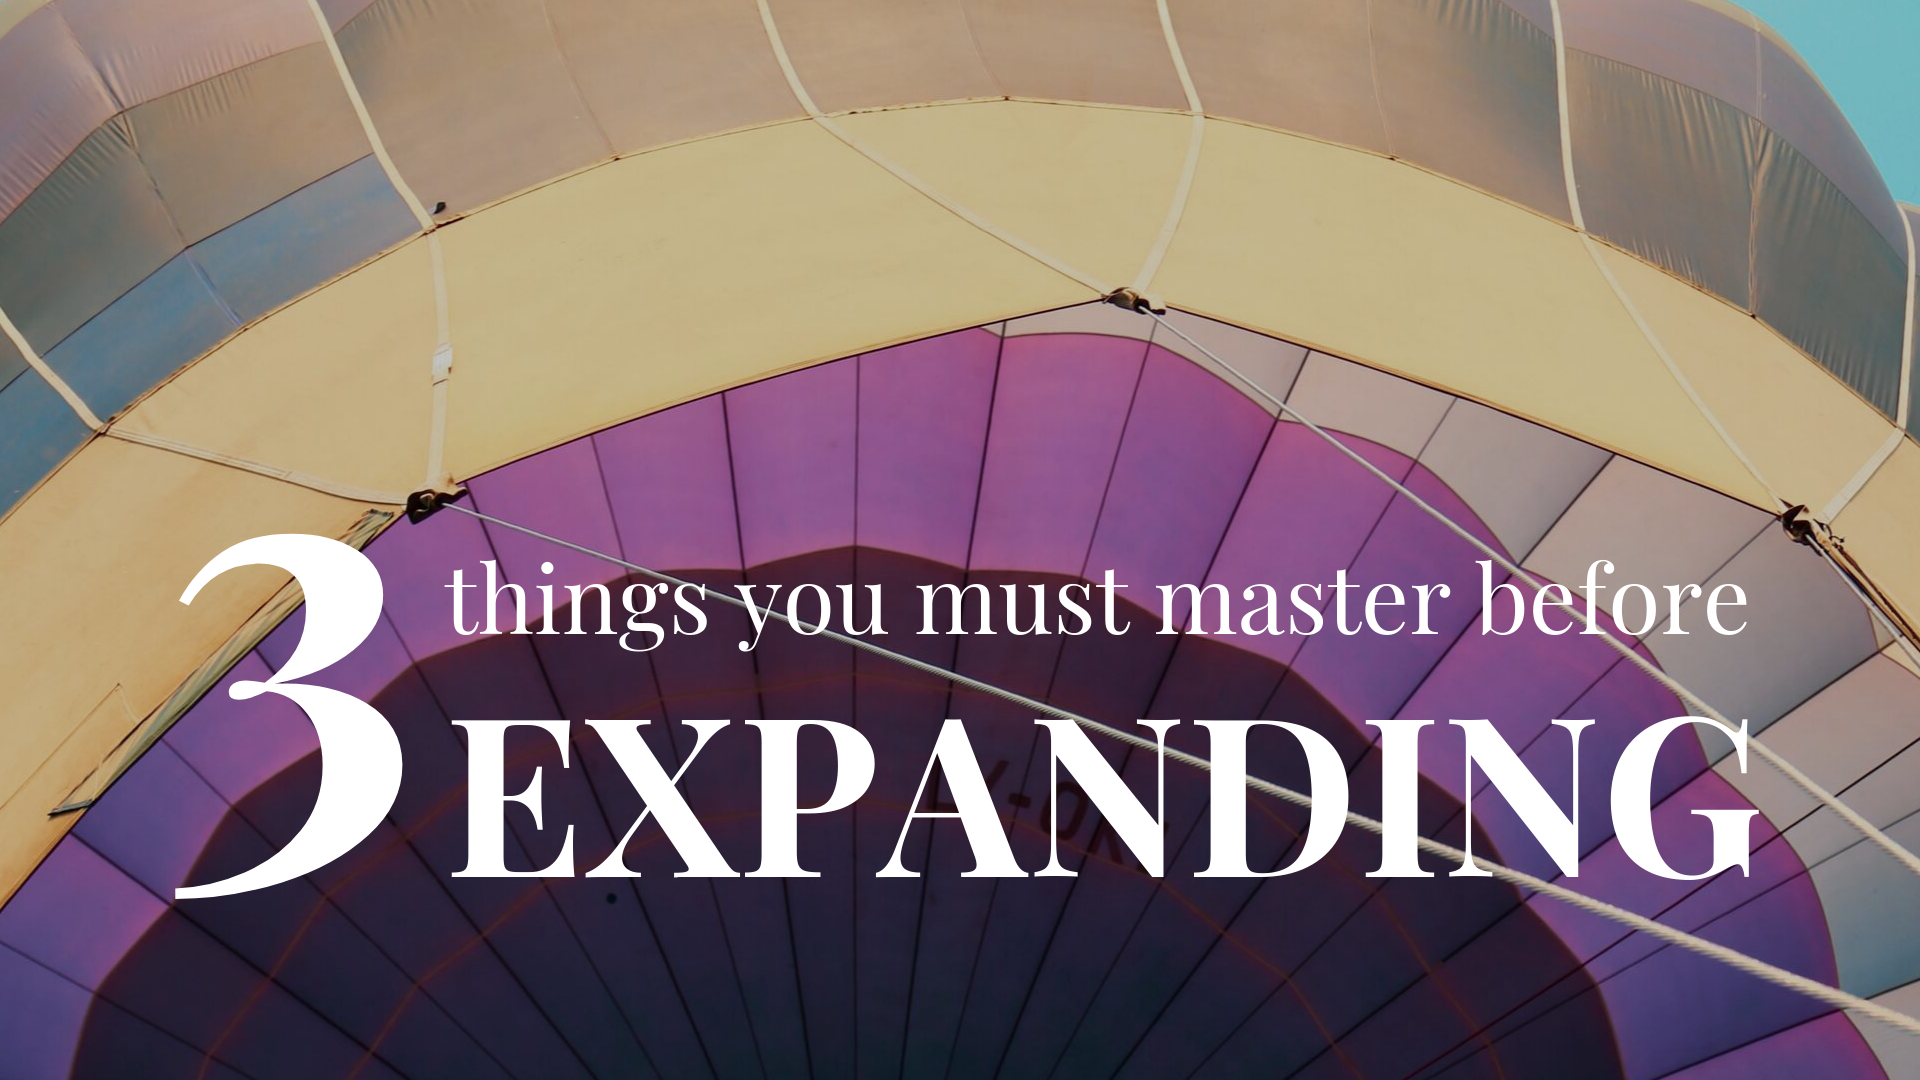 3 Things You Must Master Before Expanding